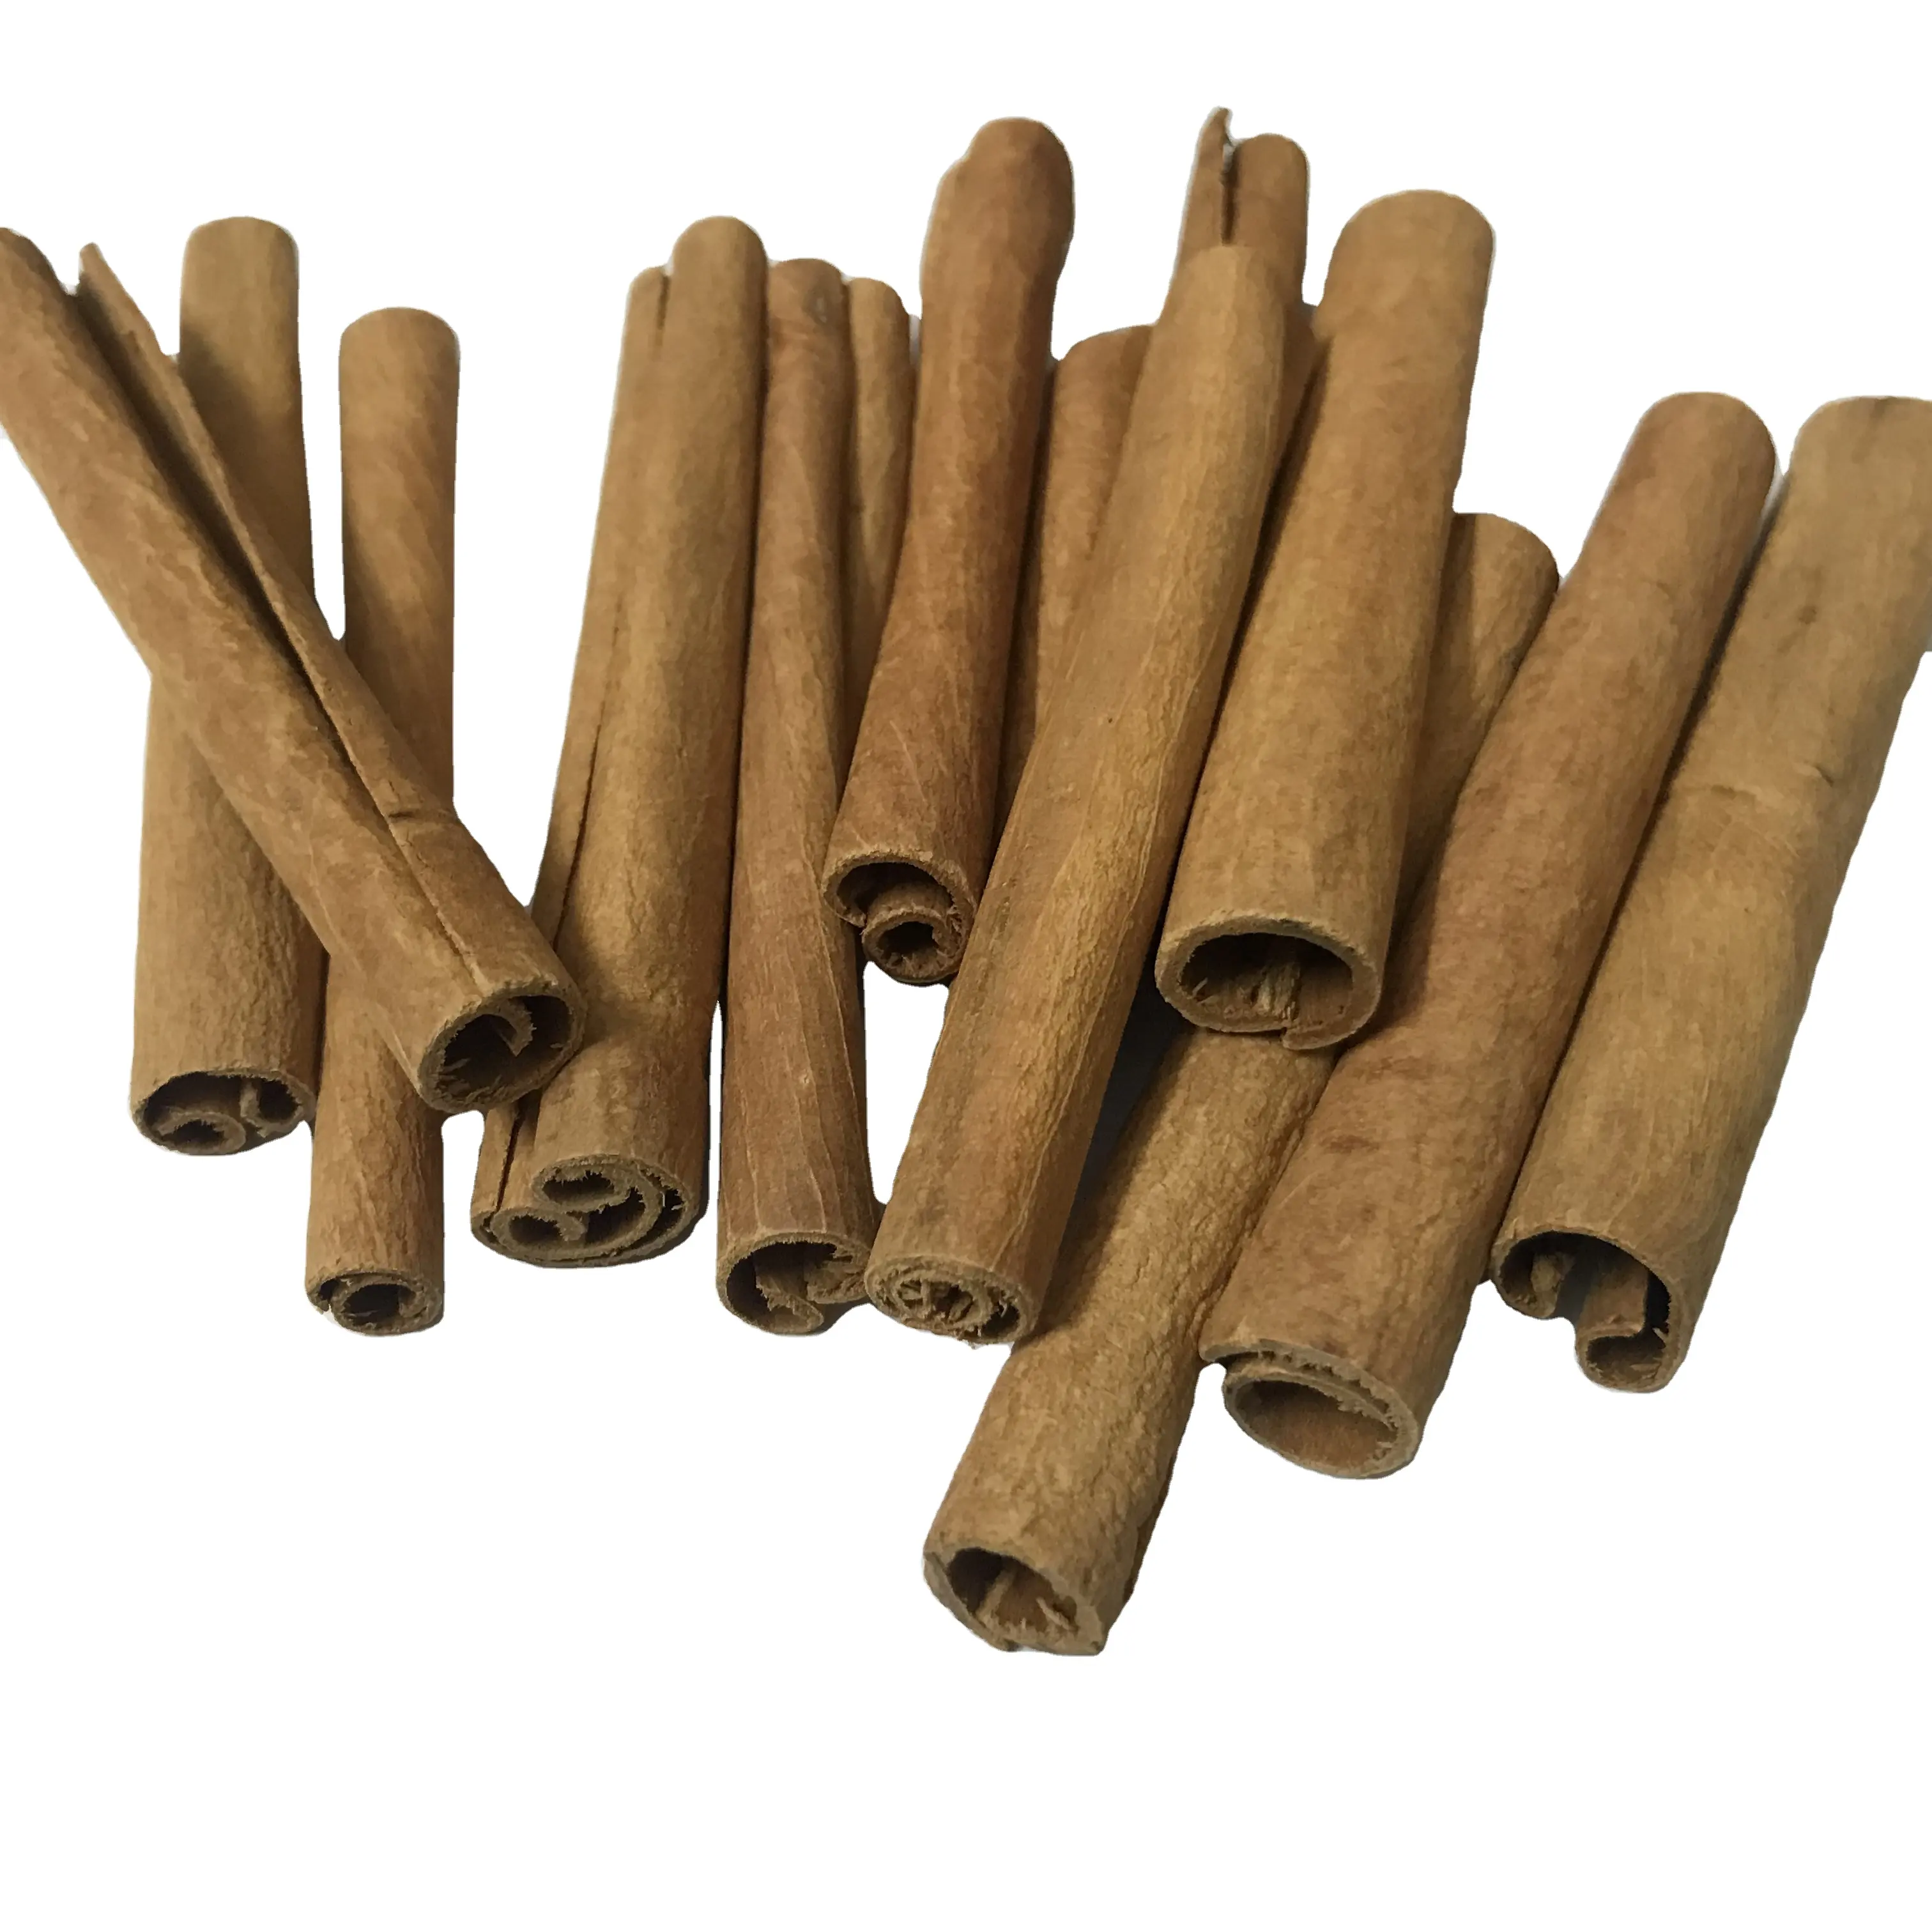 Spices Cinnamon Vietnamese herb Top quality Cassia cinnamon stick bark spices 80% roll from famous brand +84326055616